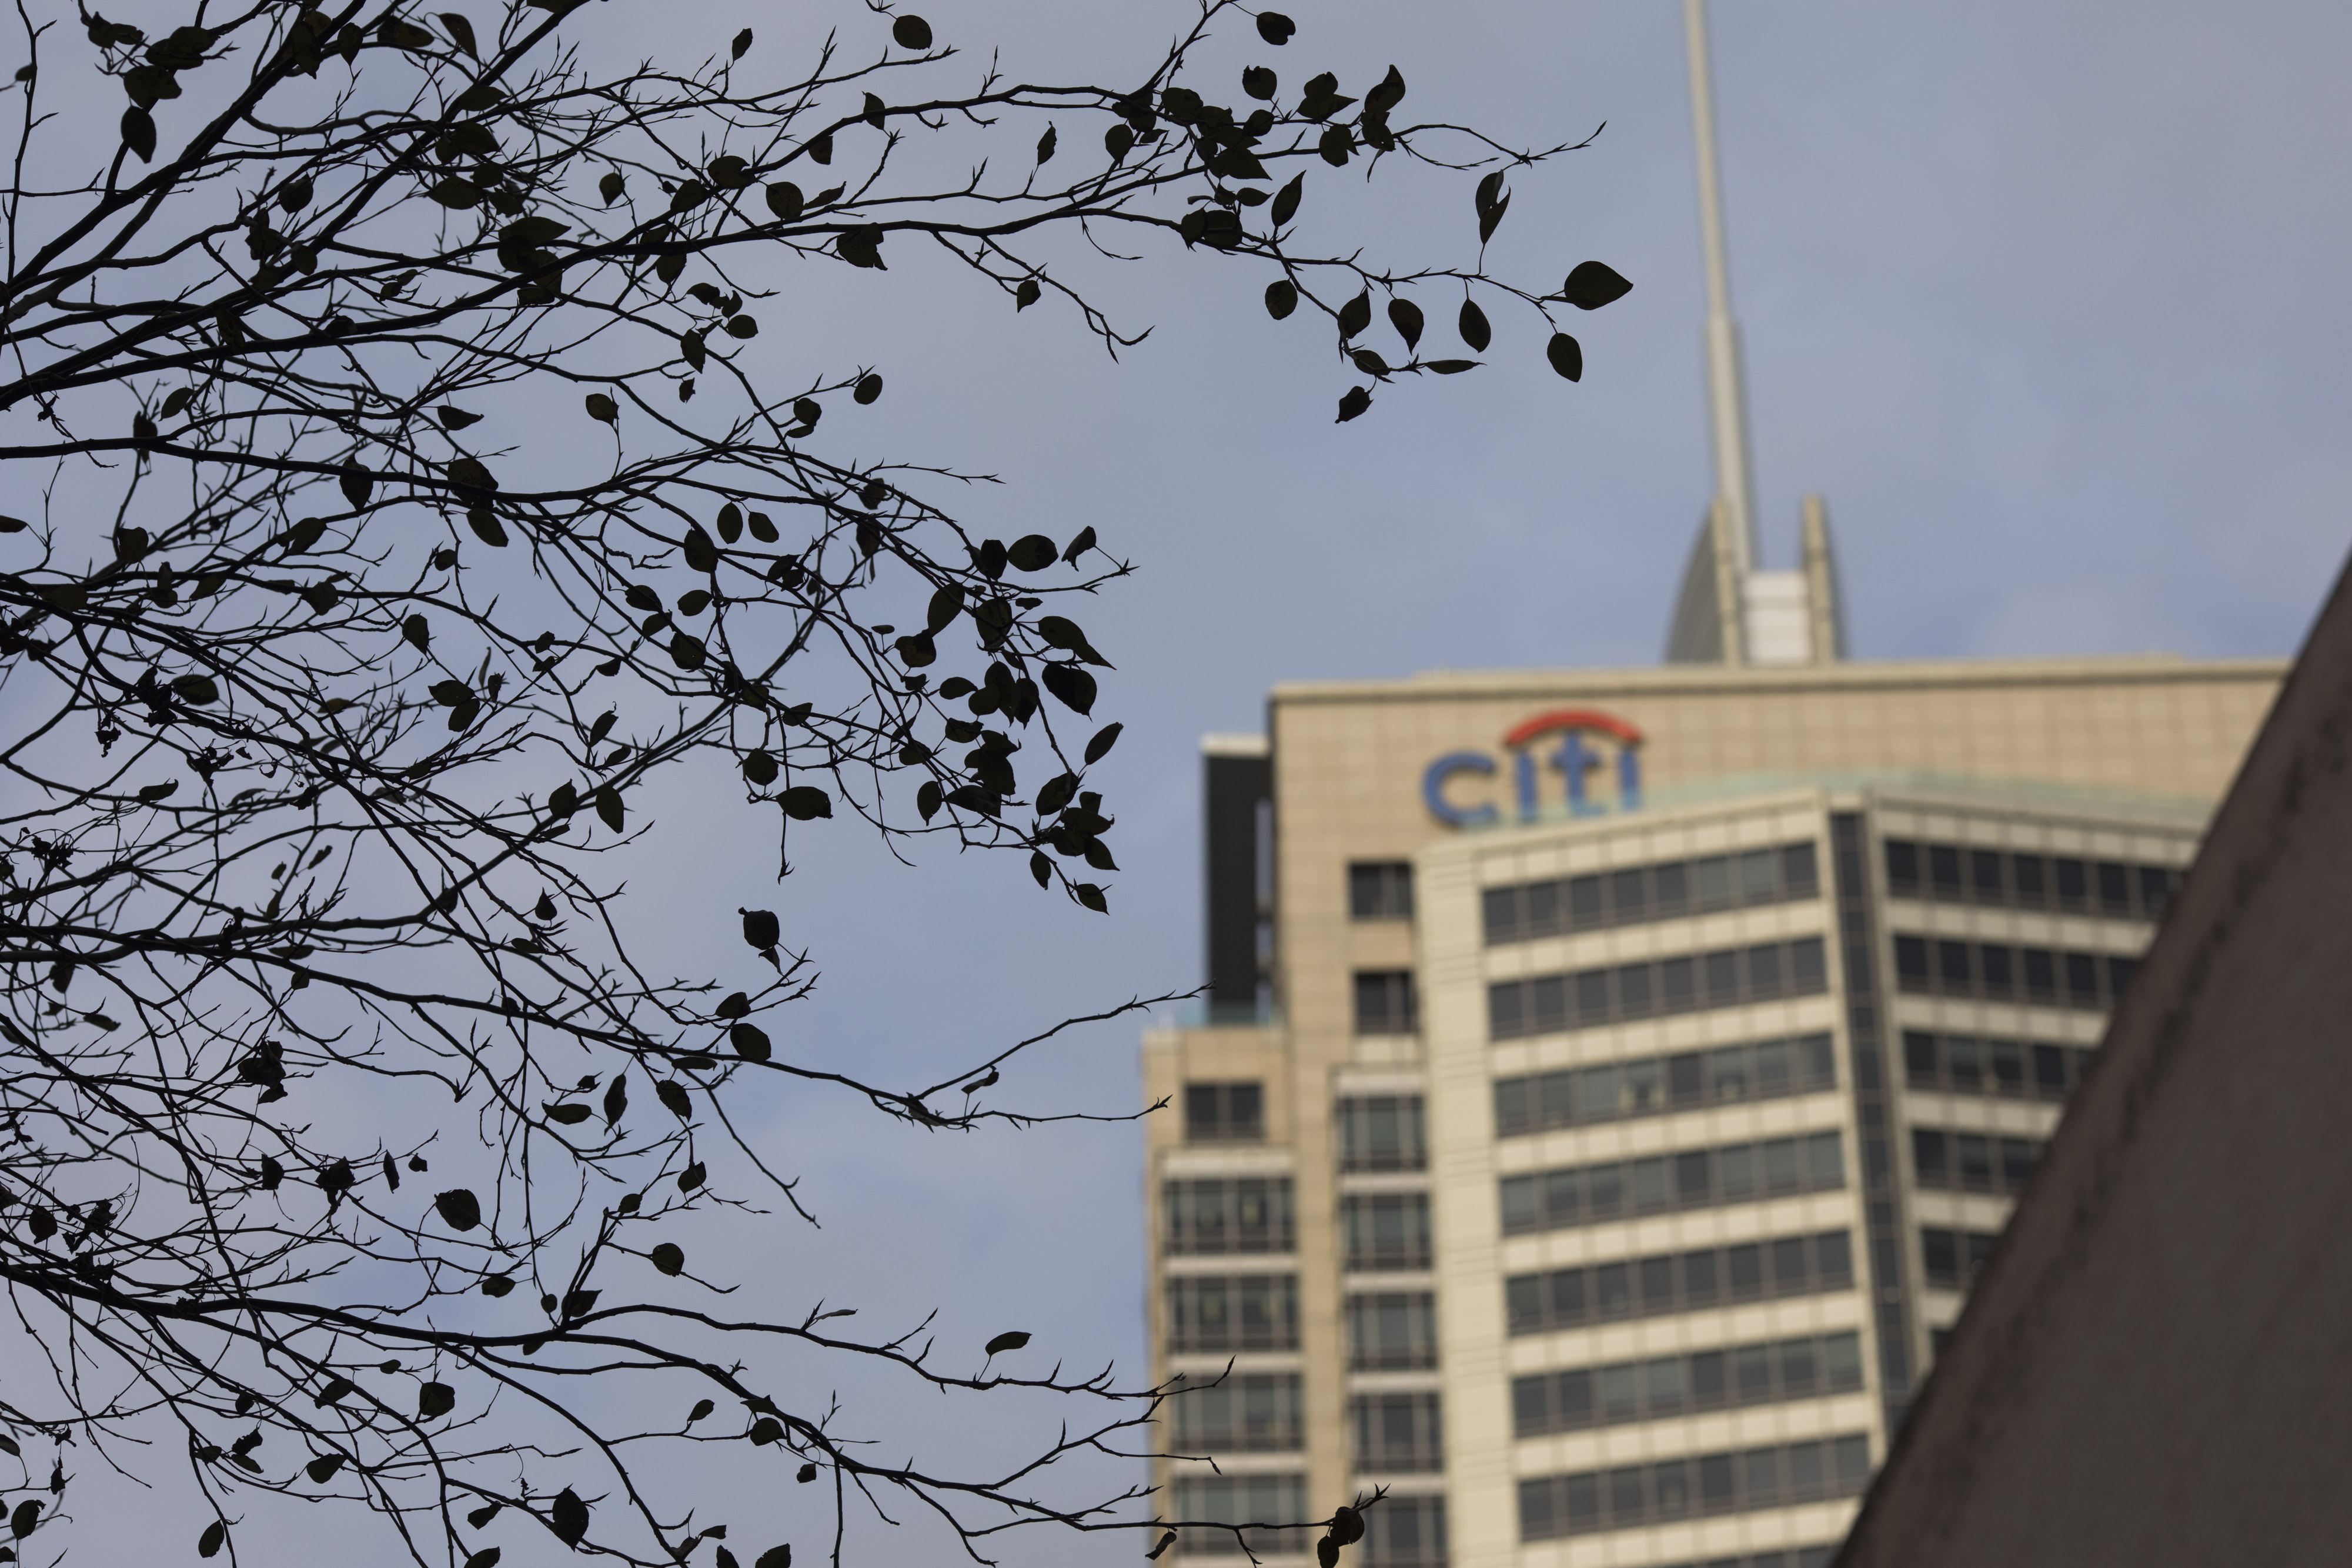 The Citigroup Inc. logo atop a building in Sydney, Australia, on Friday, April 16, 2021. Citigroup plans to exit retail banking in 13 markets across Asia and the Europe, Middle East and Africa region.